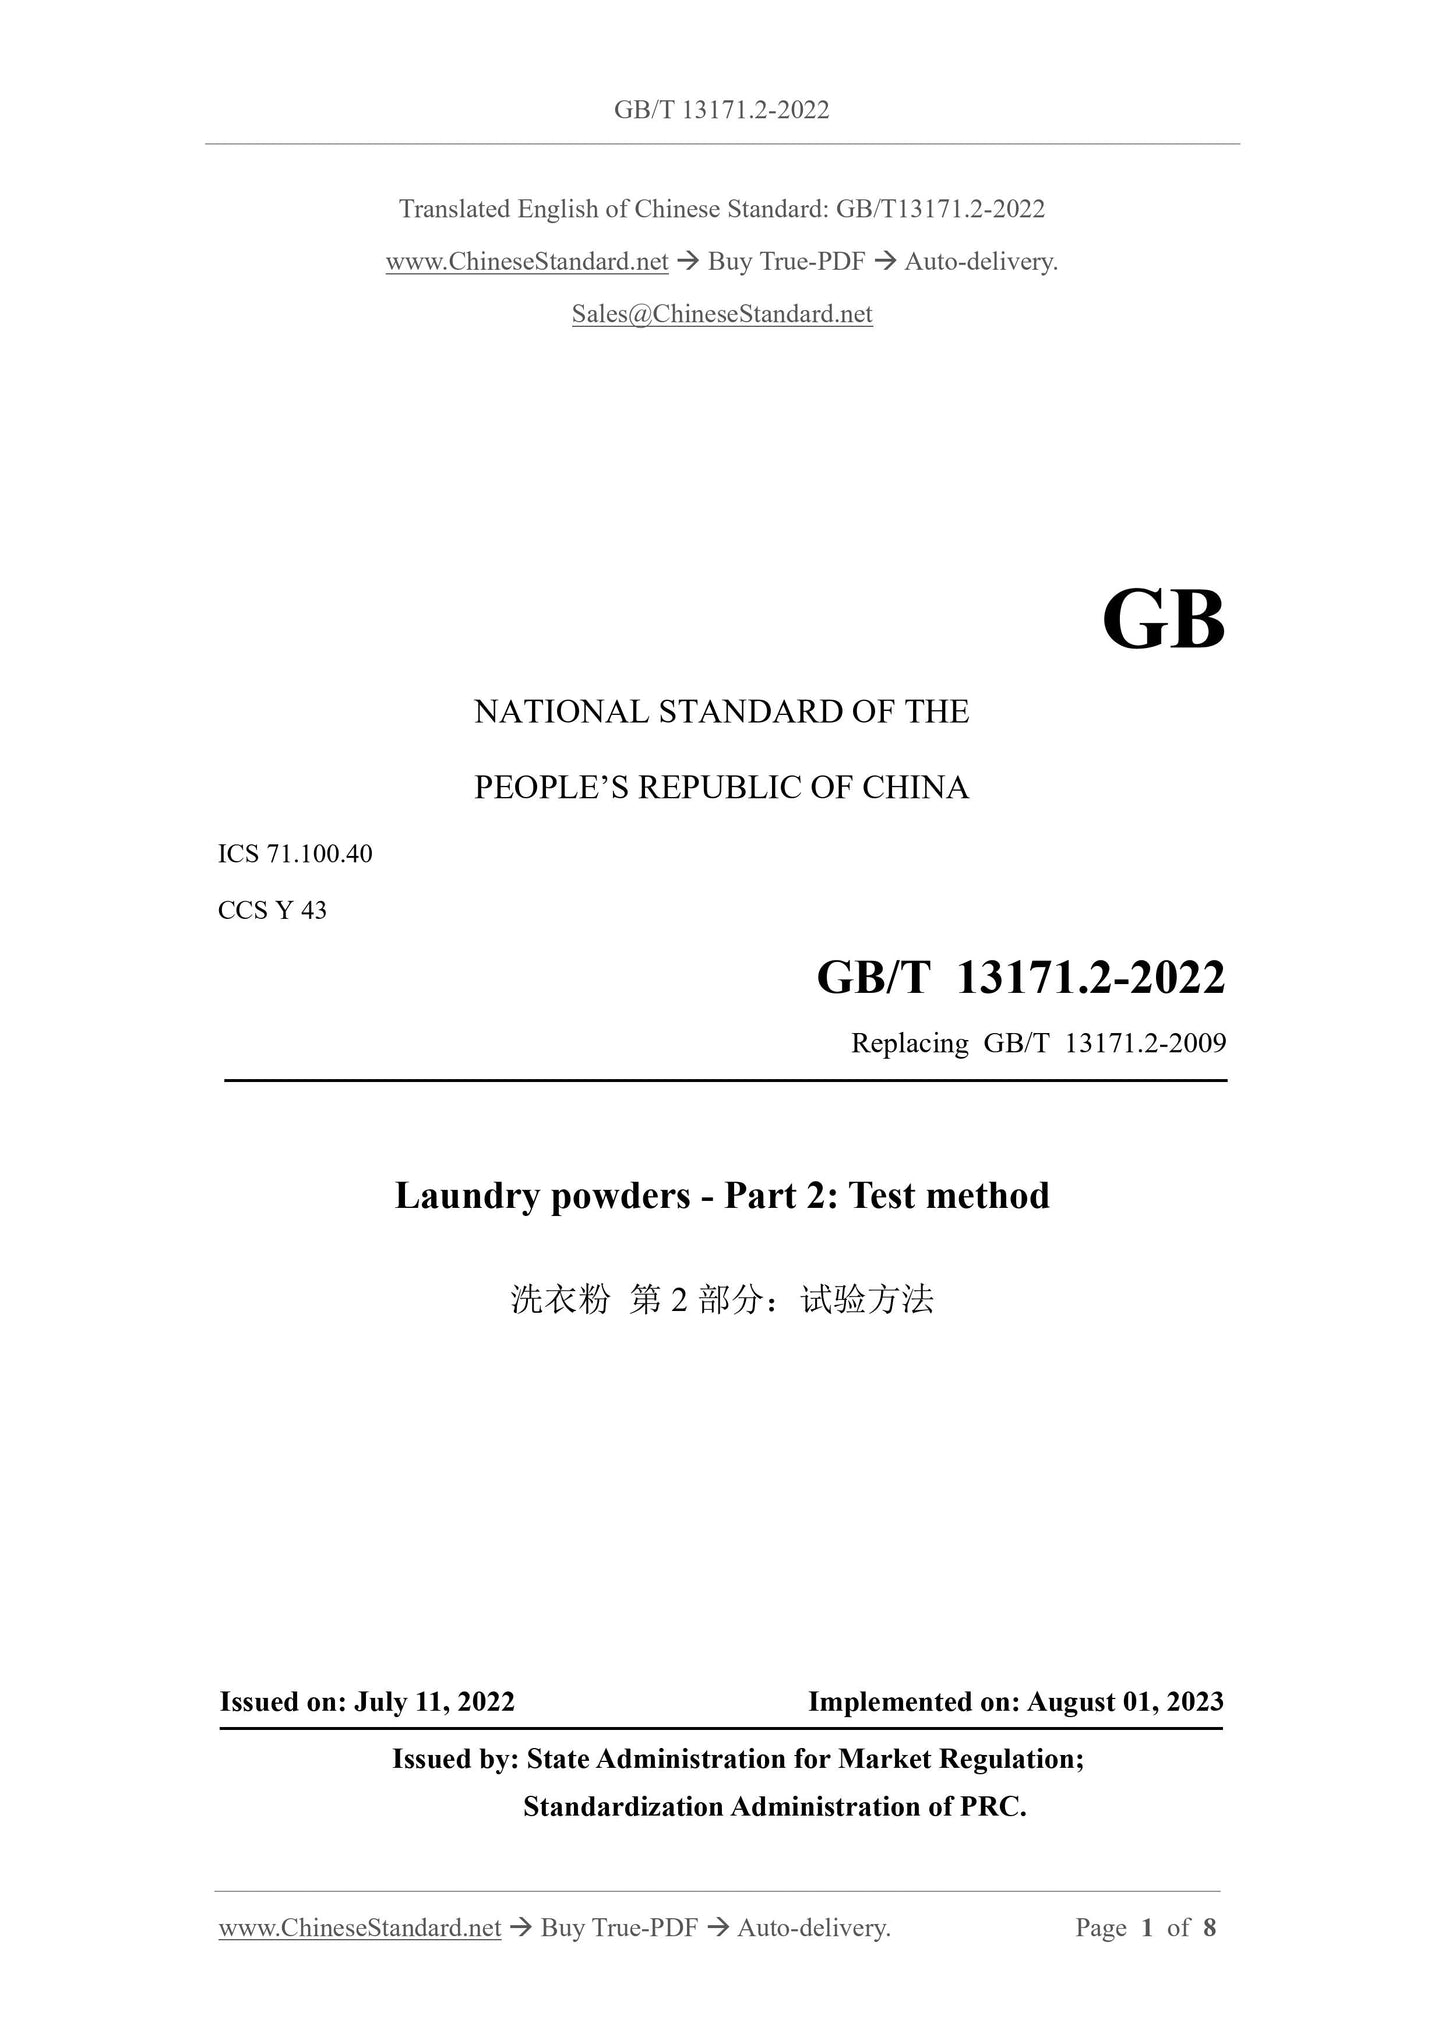 GB/T 13171.2-2022 Page 1